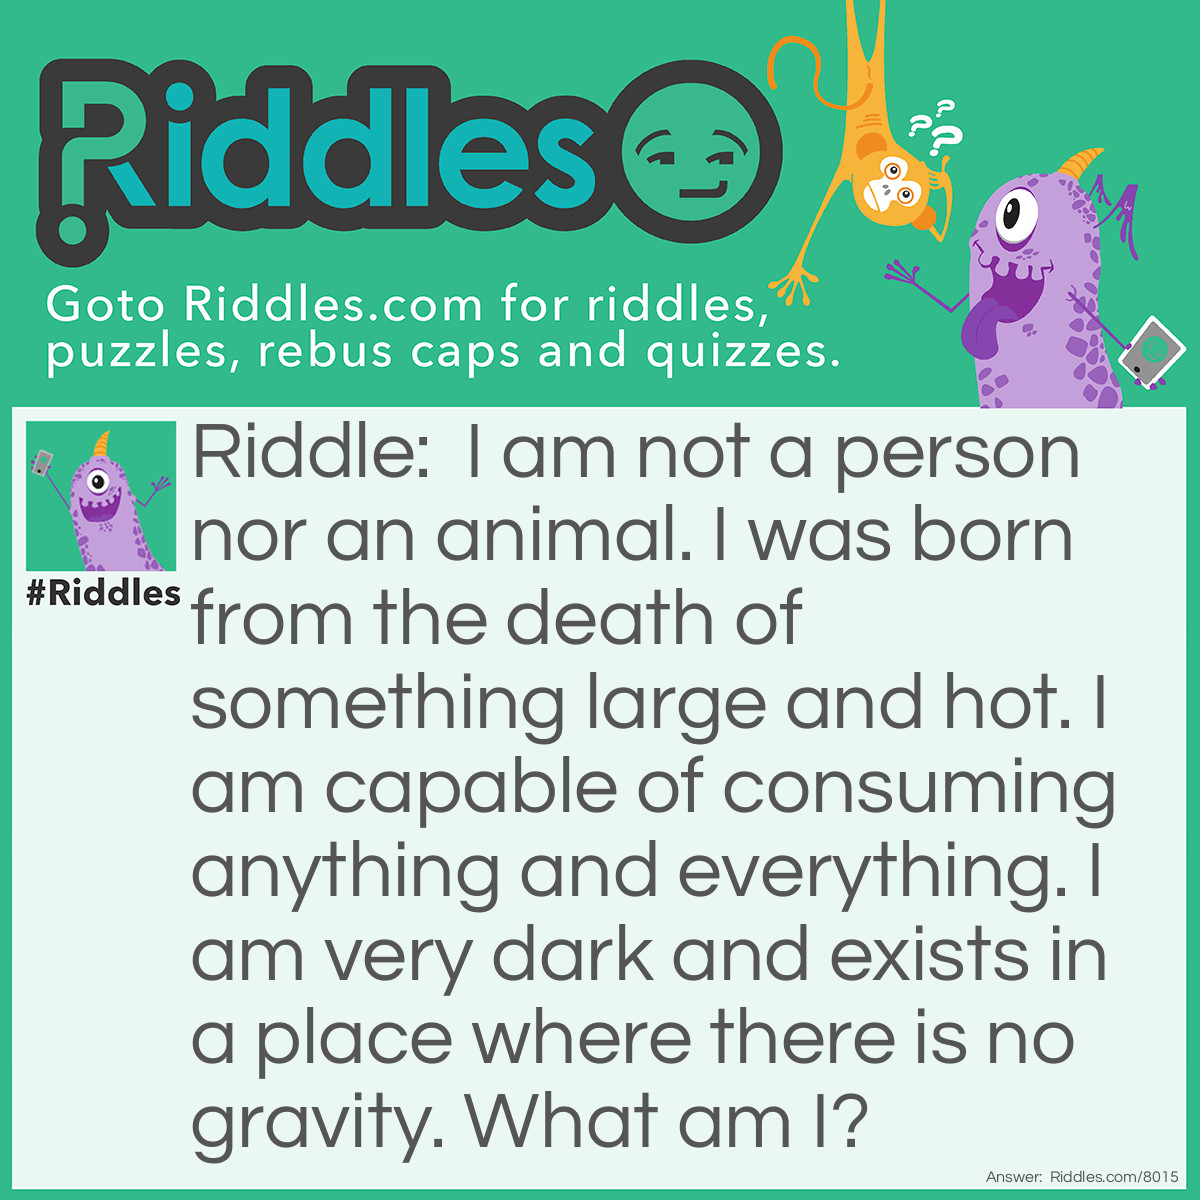 Riddle: I am not a person nor an animal. I was born from the death of something large and hot. I am capable of consuming anything and everything. I am very dark and exists in a place where there is no gravity. What am I? Answer: A black hole.